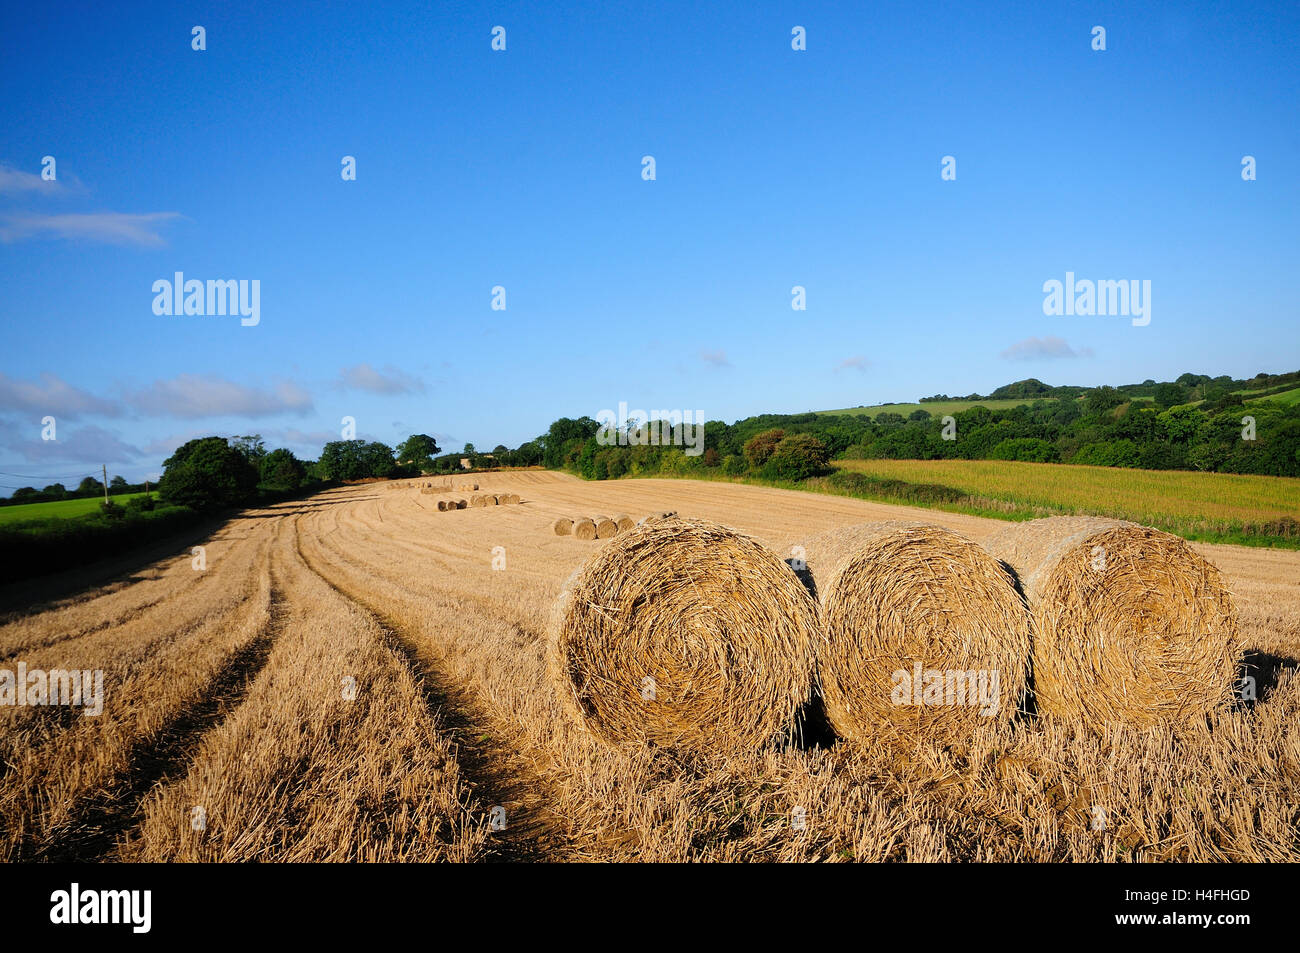 Round straw bales in corn field at harvest time Stock Photo